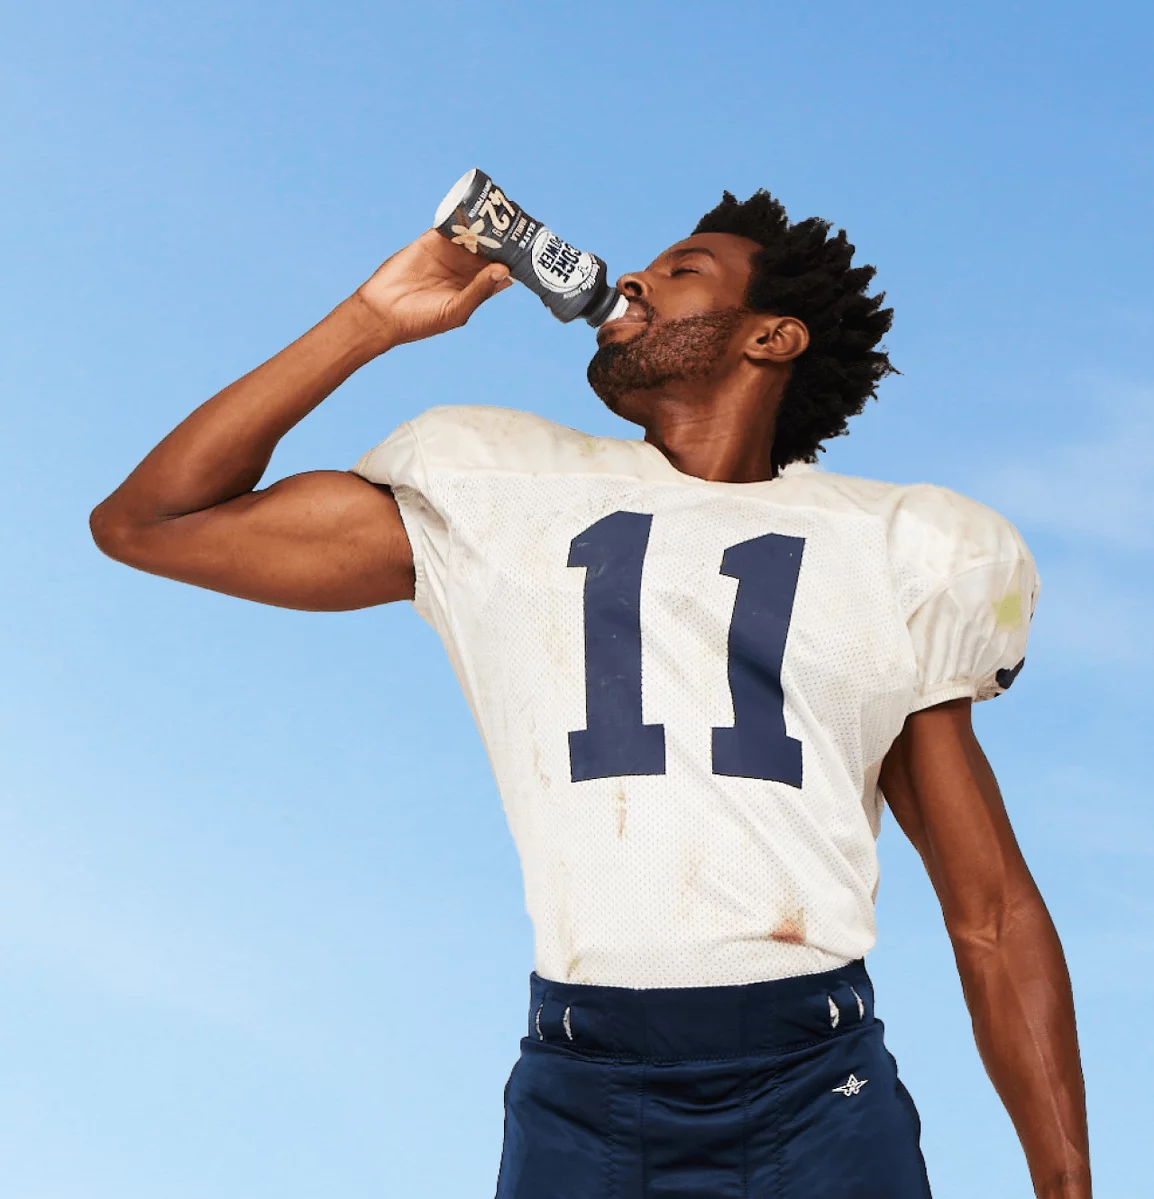 Football player drinking fairlife core power